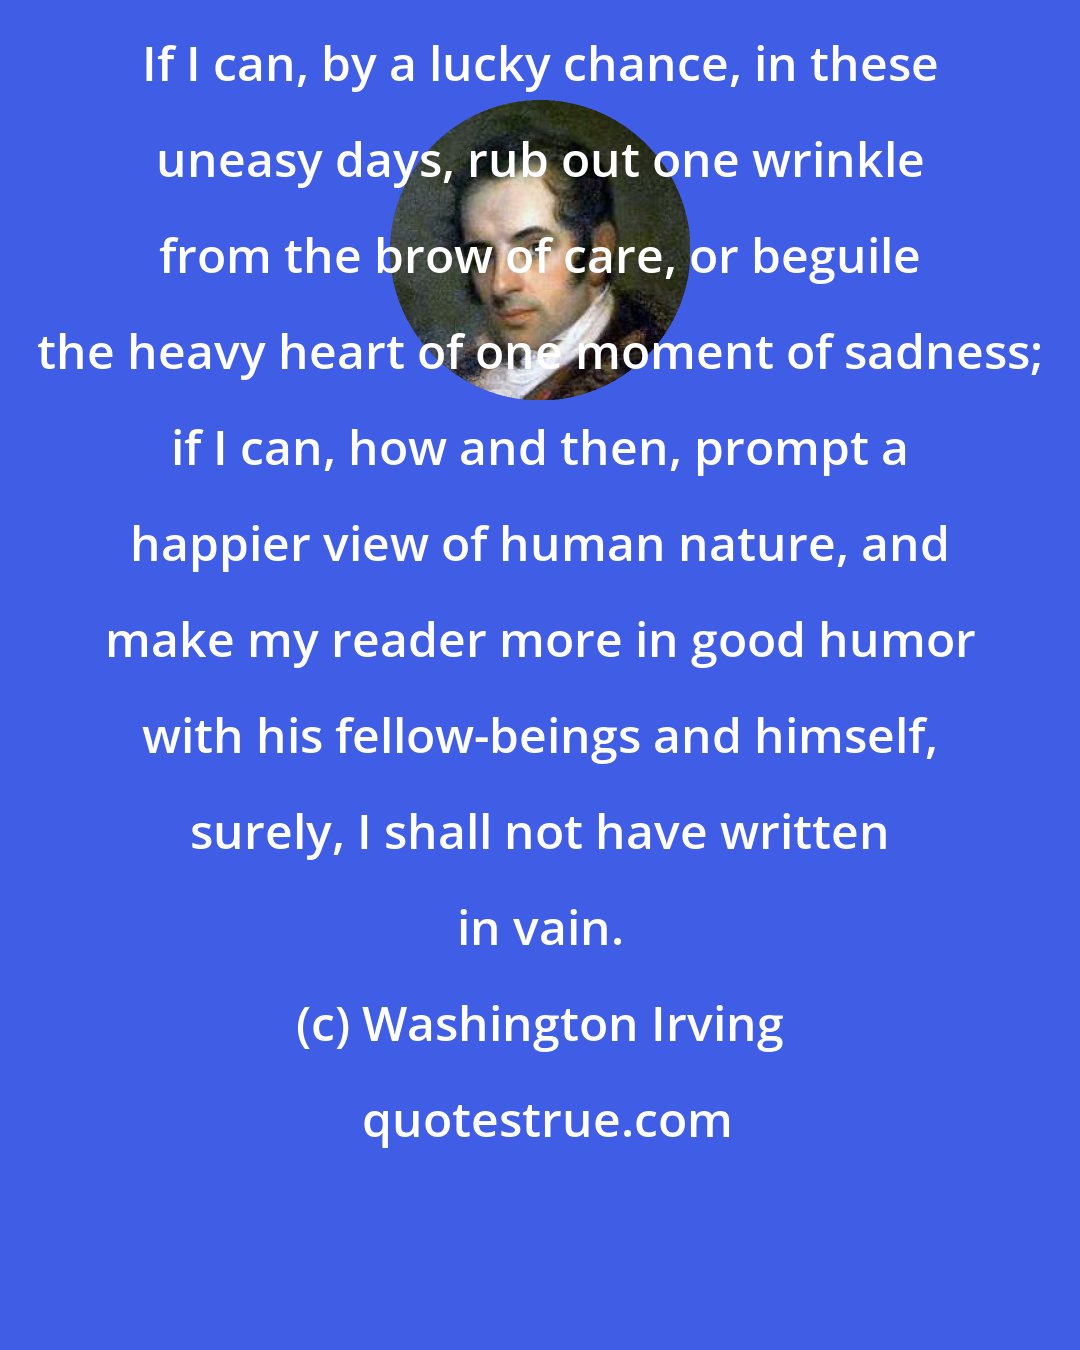 Washington Irving: If I can, by a lucky chance, in these uneasy days, rub out one wrinkle from the brow of care, or beguile the heavy heart of one moment of sadness; if I can, how and then, prompt a happier view of human nature, and make my reader more in good humor with his fellow-beings and himself, surely, I shall not have written in vain.